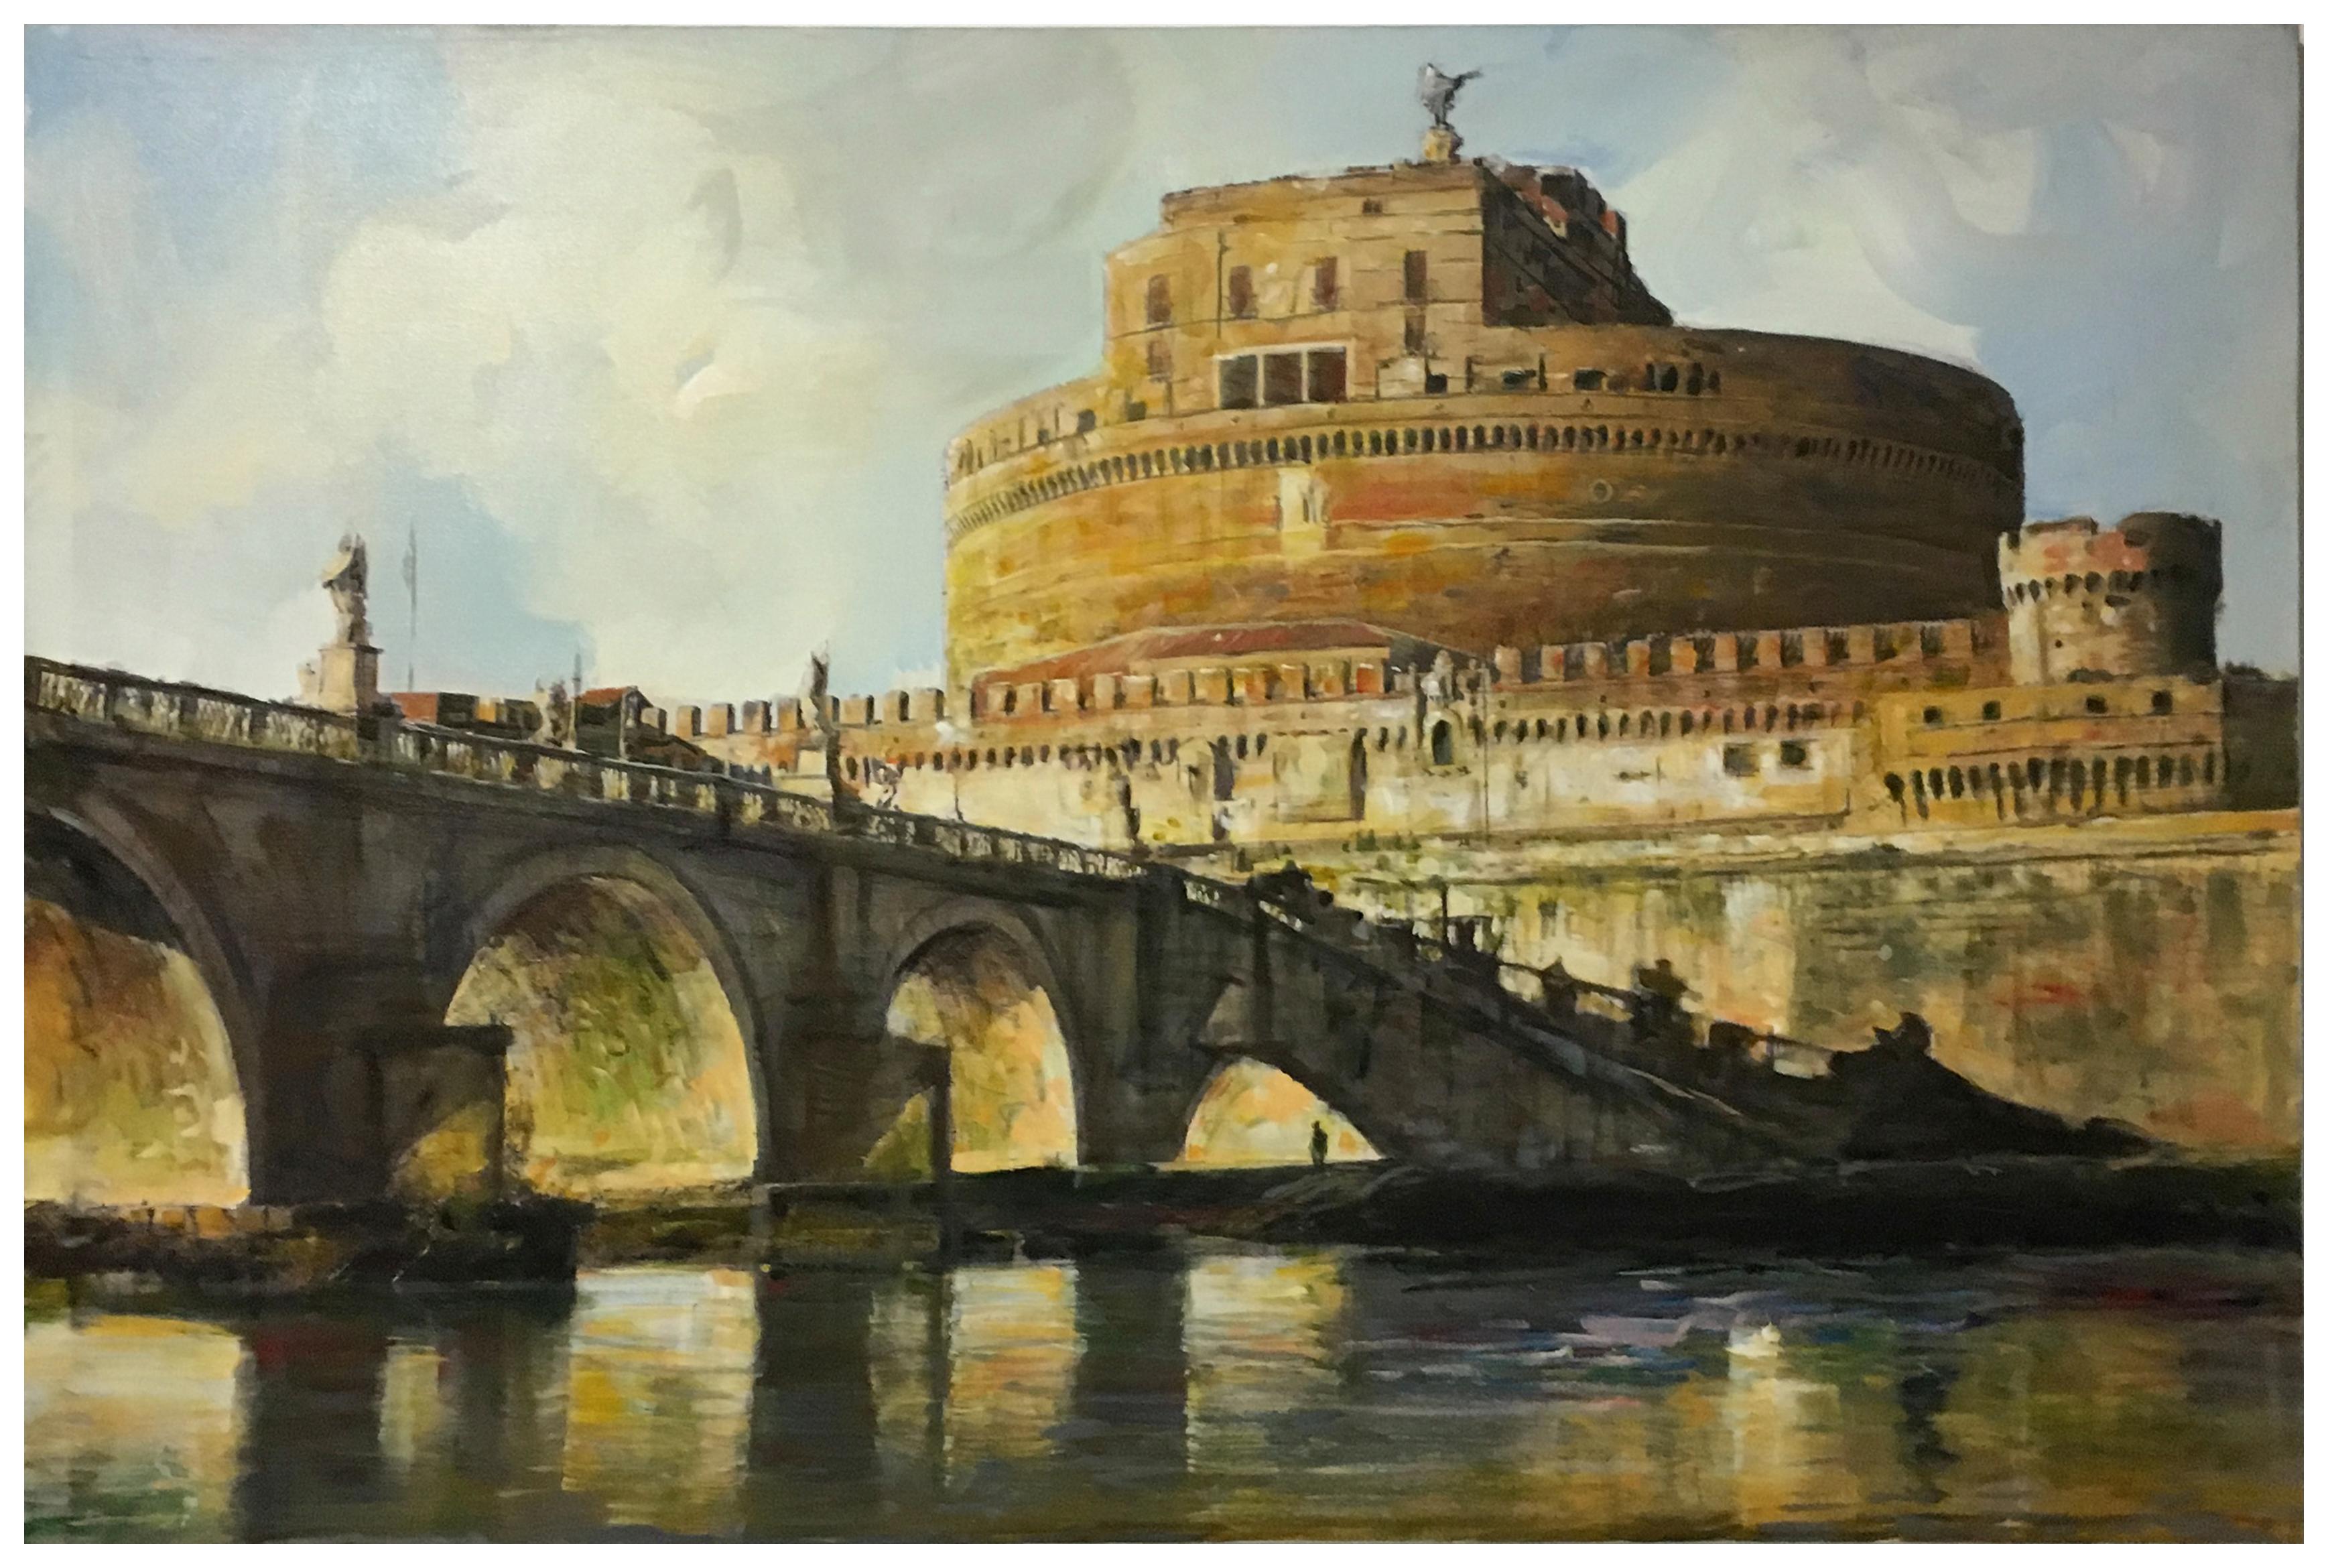 ROME SANT'ANGELO CASTEL Italian oil on canvas painting cm.80x120, Alfonso Pragliola Italia 2010
Frame available on request from our workshop.